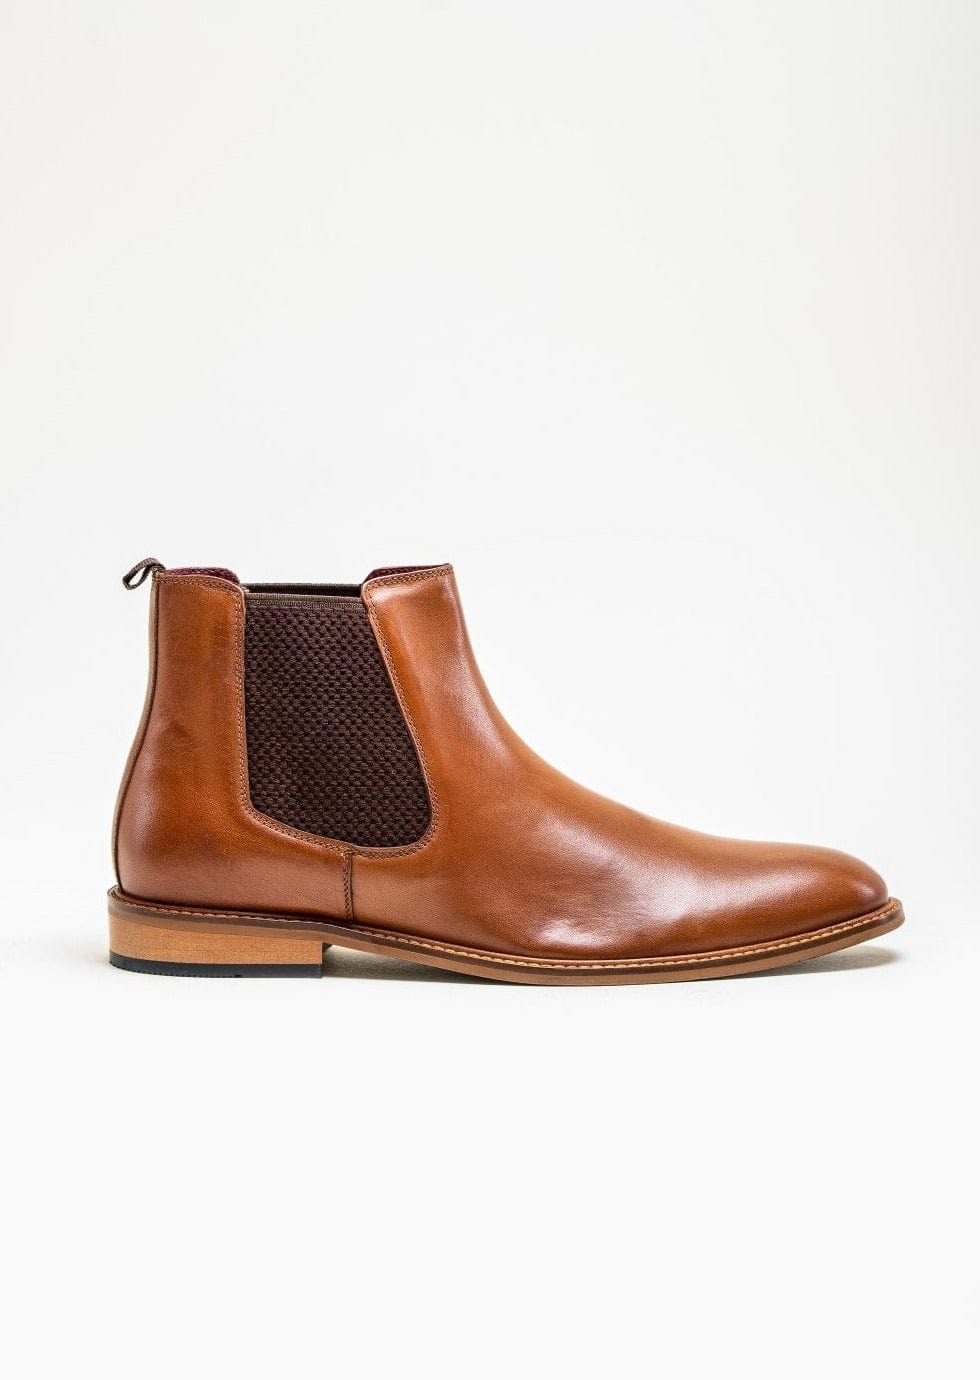 WATSON MID TAN LEATHER DEALER BOOTS